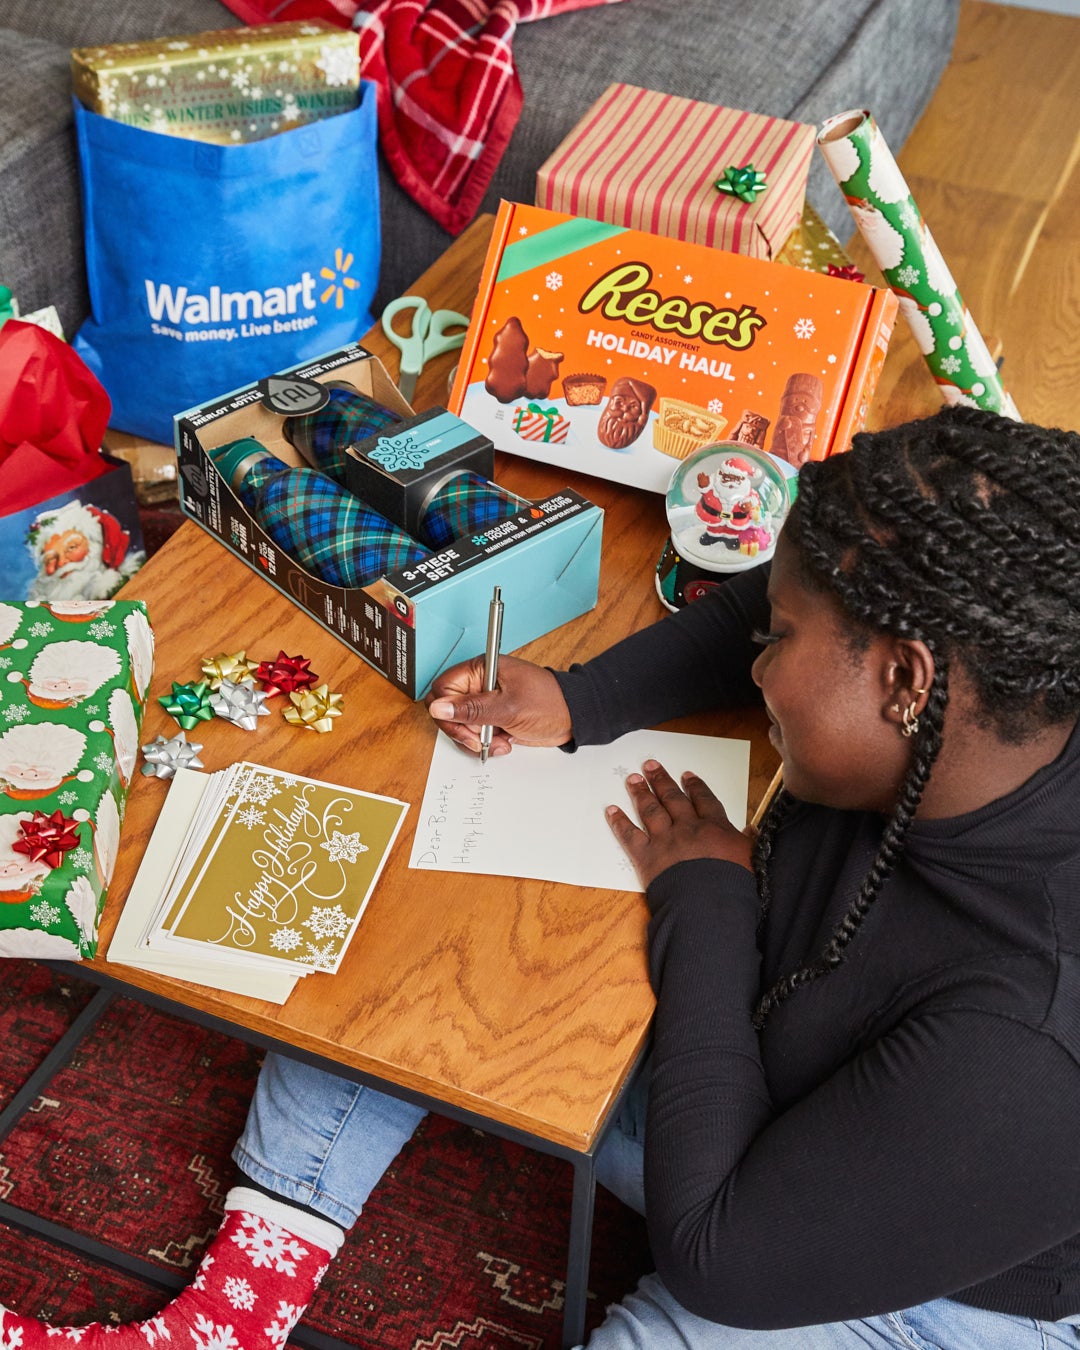 Elise writes in holiday card on table next to Reese's holiday haul candies, Santa snow globe, Walmart bag, and plaid 3-piece bottle set